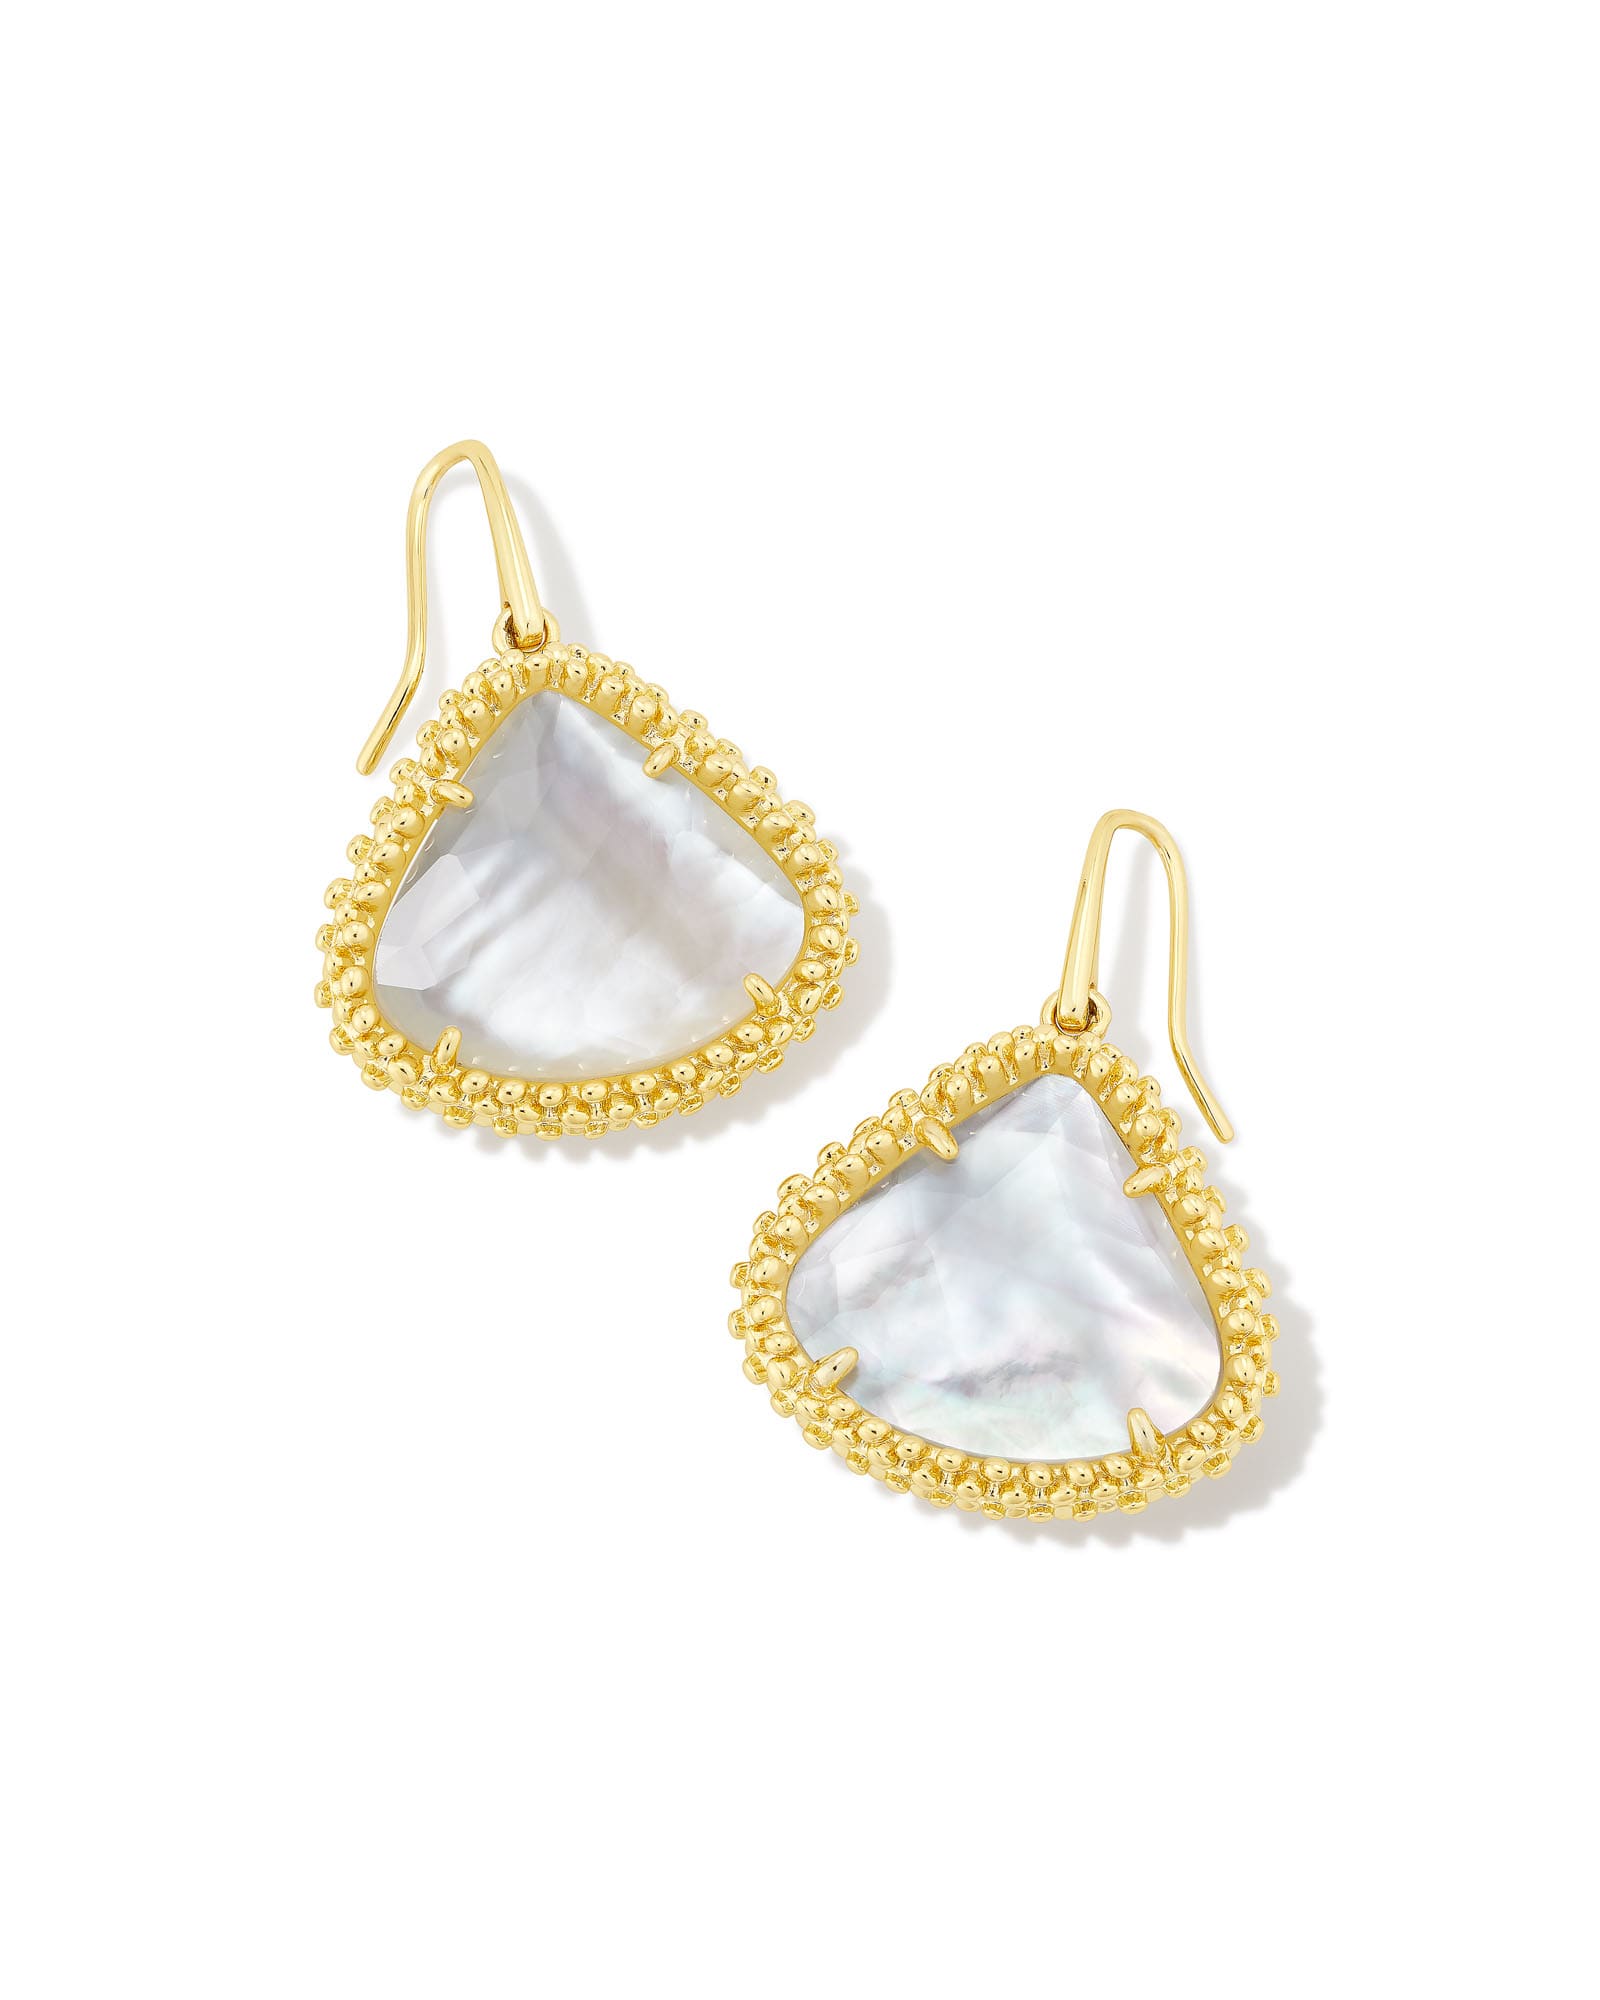 Kendra Scott Framed Kendall Gold Large Drop Earrings in Ivory Mother-of-Pearl | Mother Of Pearl